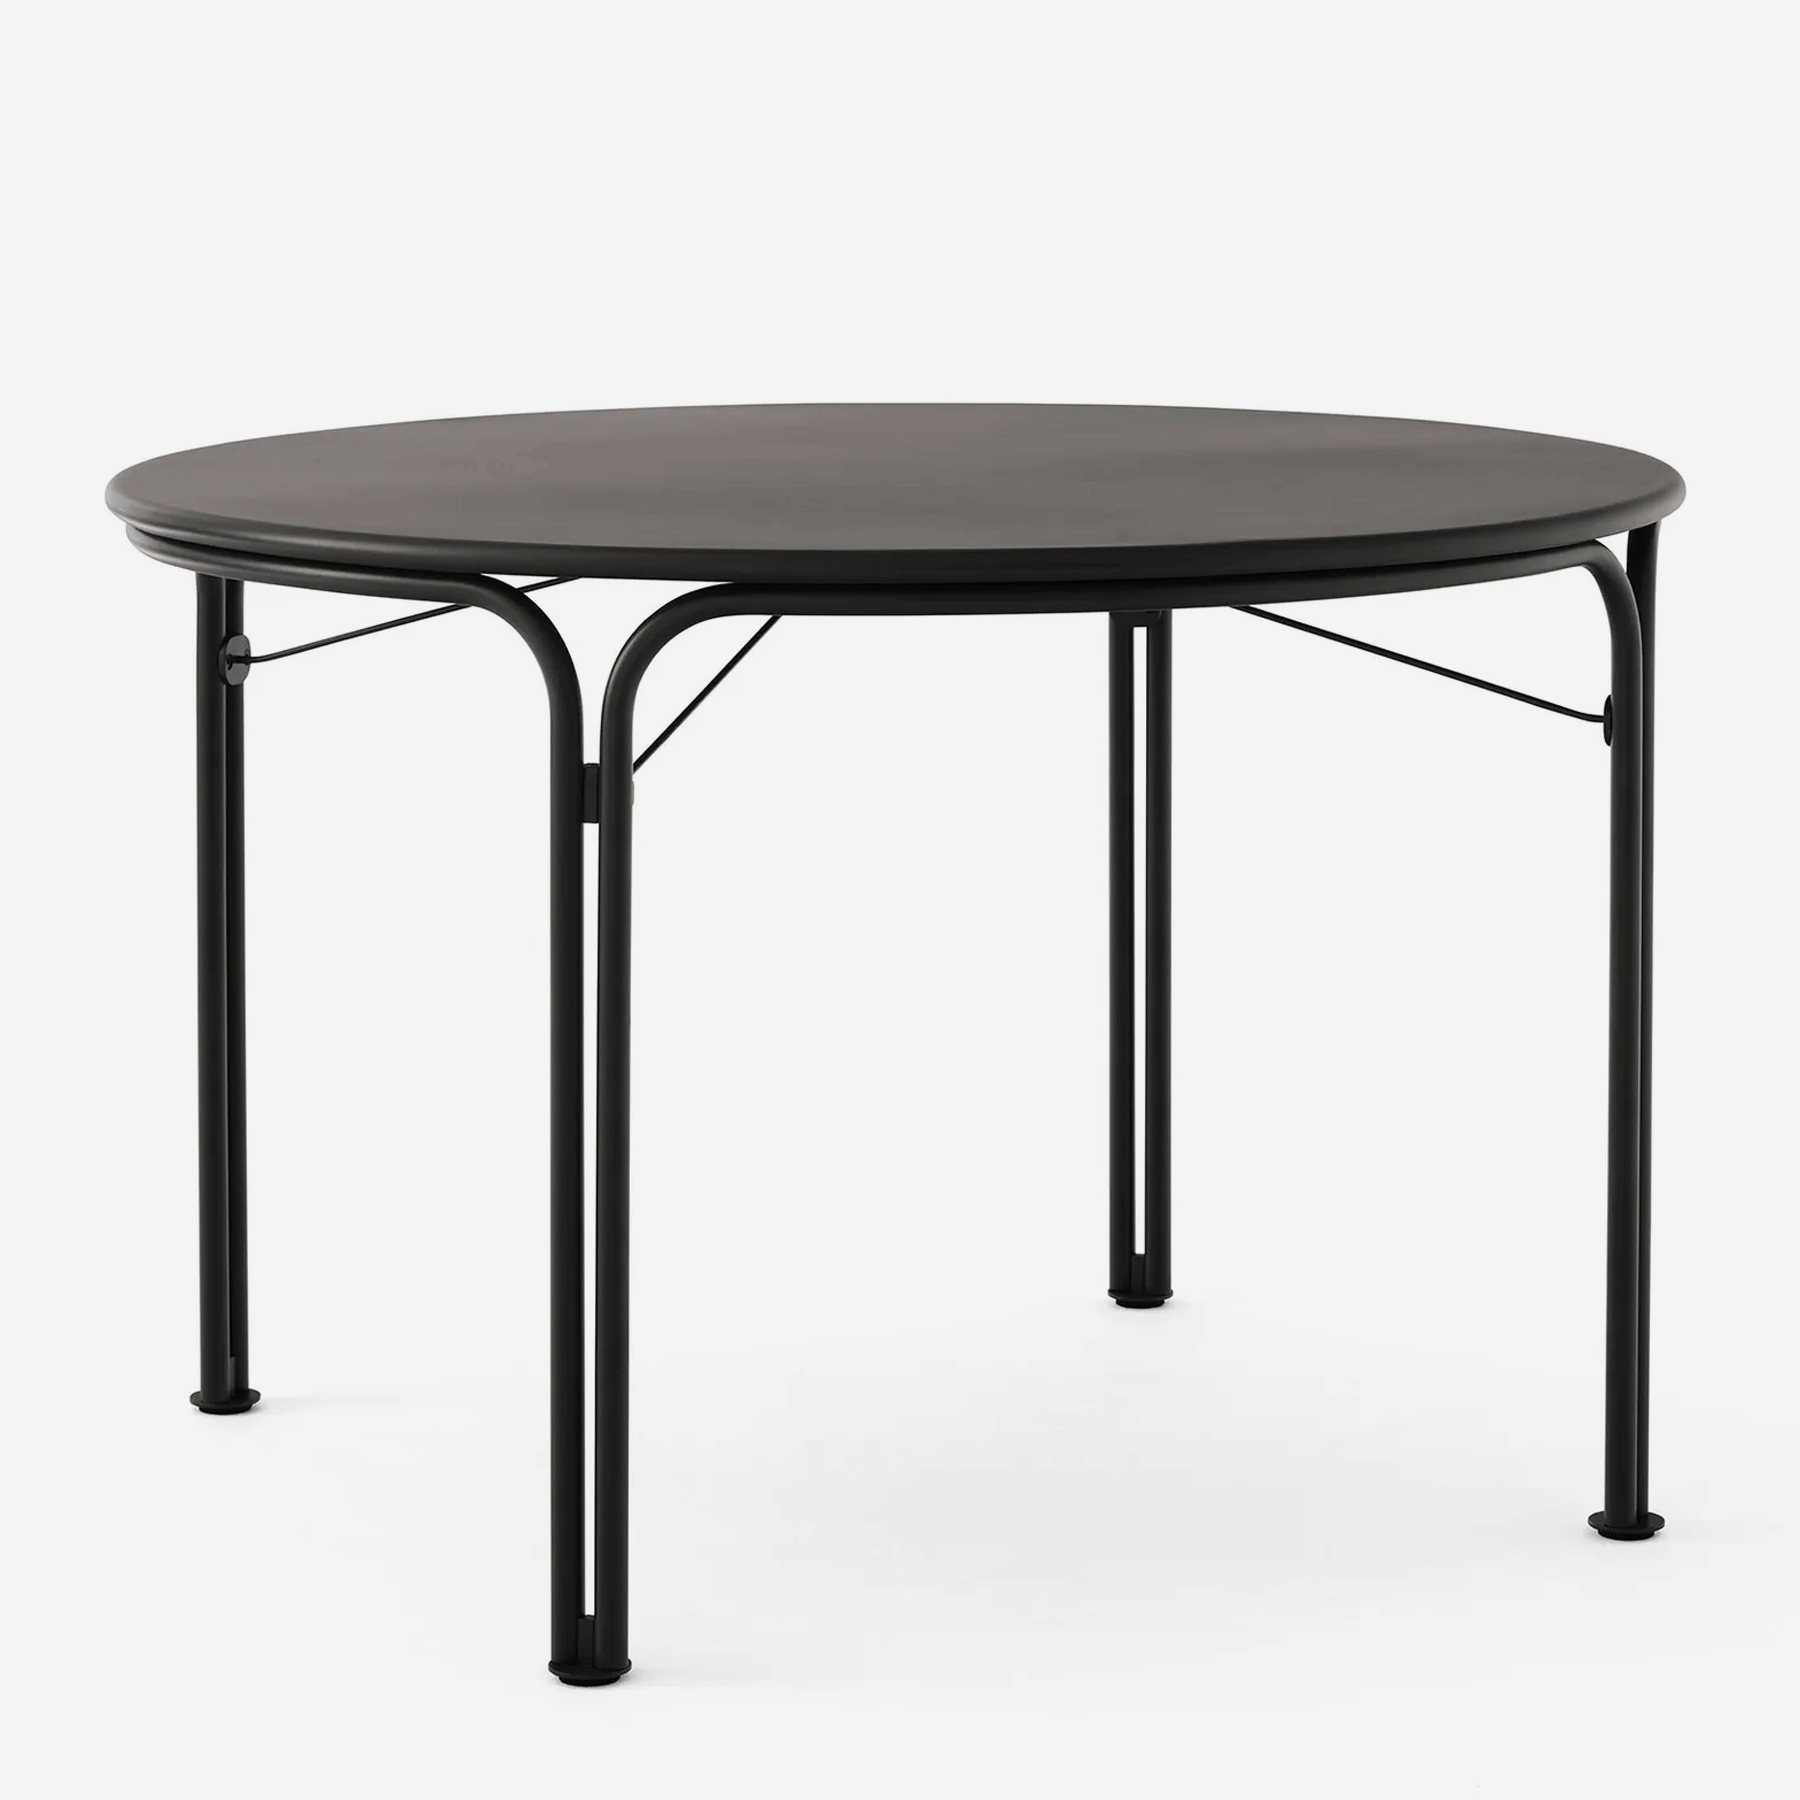 Thorvald SC98 Dining table